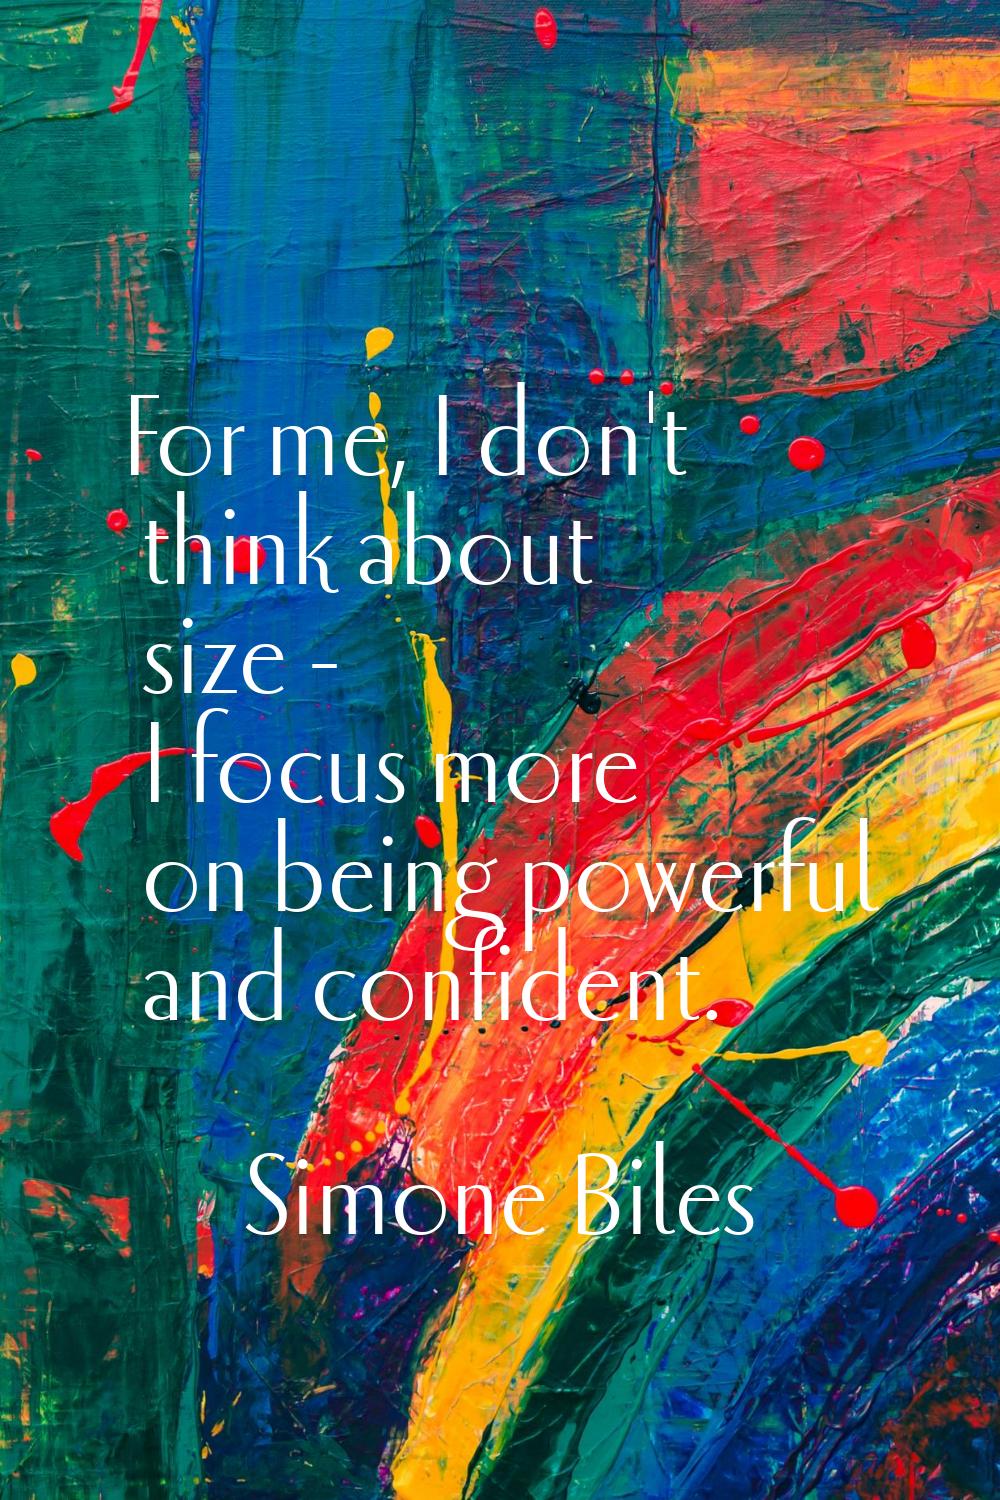 For me, I don't think about size - I focus more on being powerful and confident.